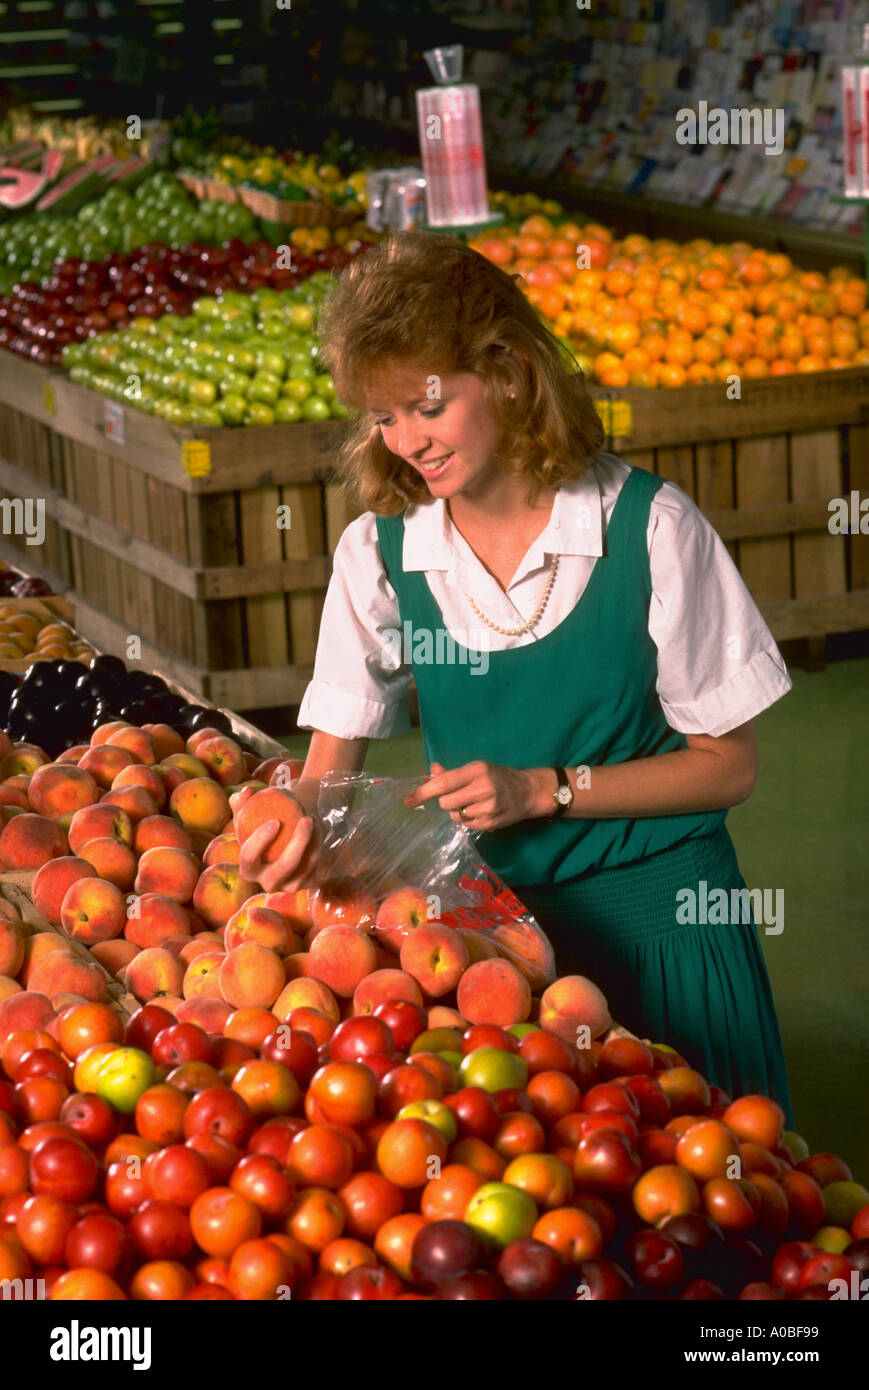 Woman buying fruit in supermarket released CF26195 Stock Photo